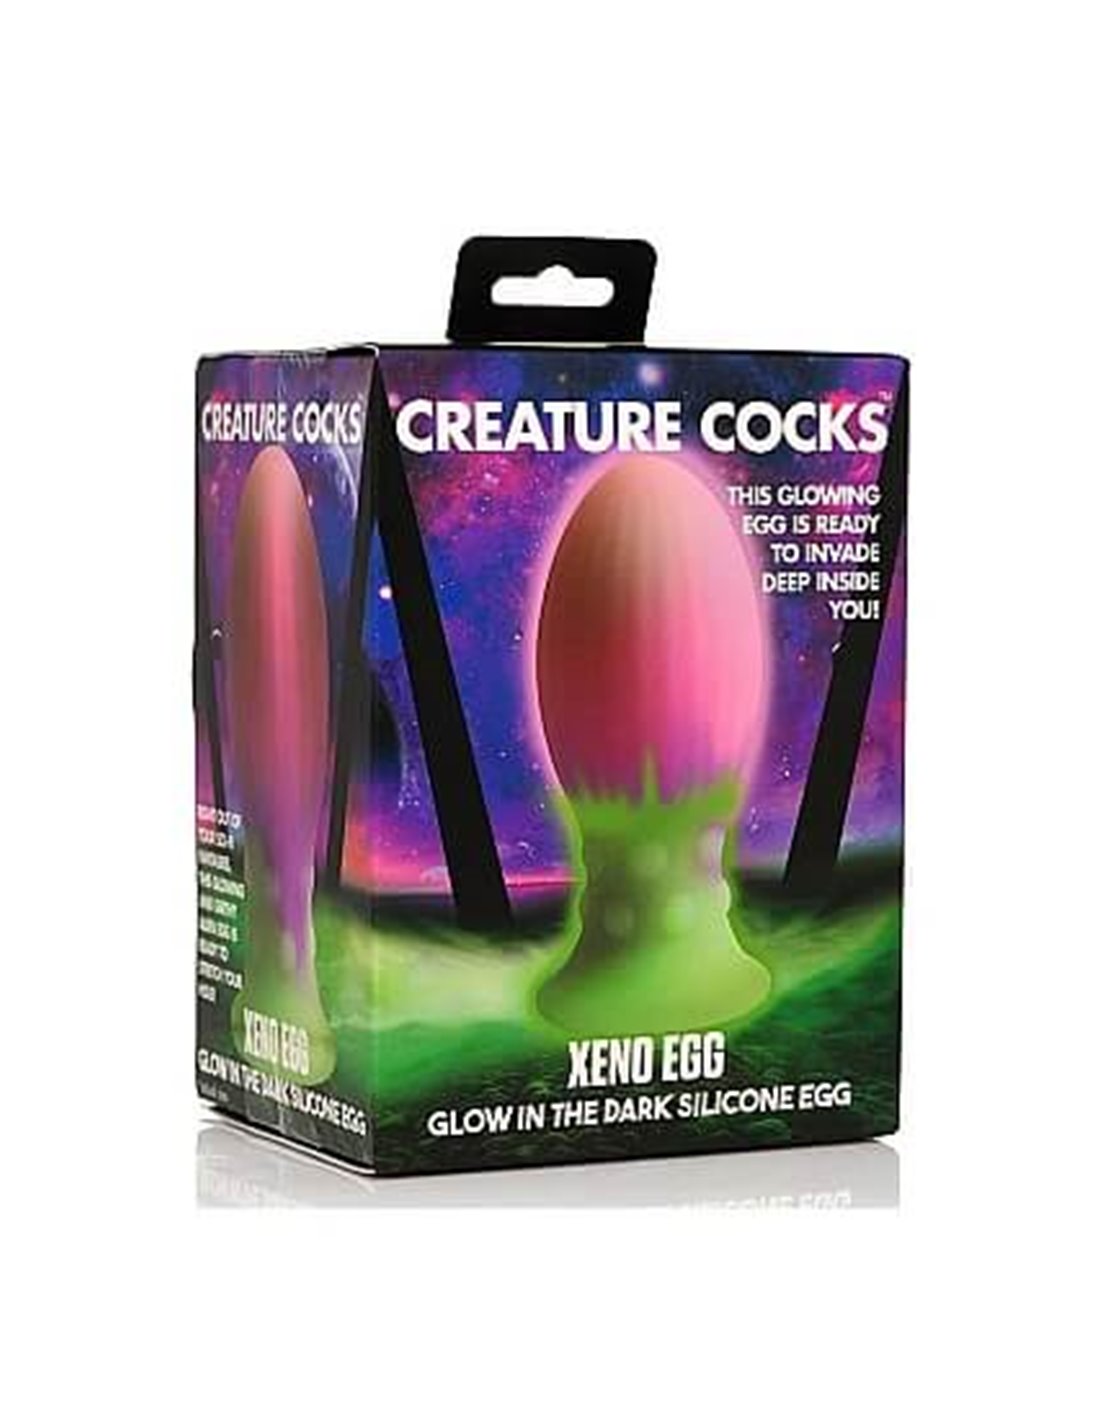 Creature Cocks Xeno Egg Glow in the Dark Silicone Egg Large Pink photo pic